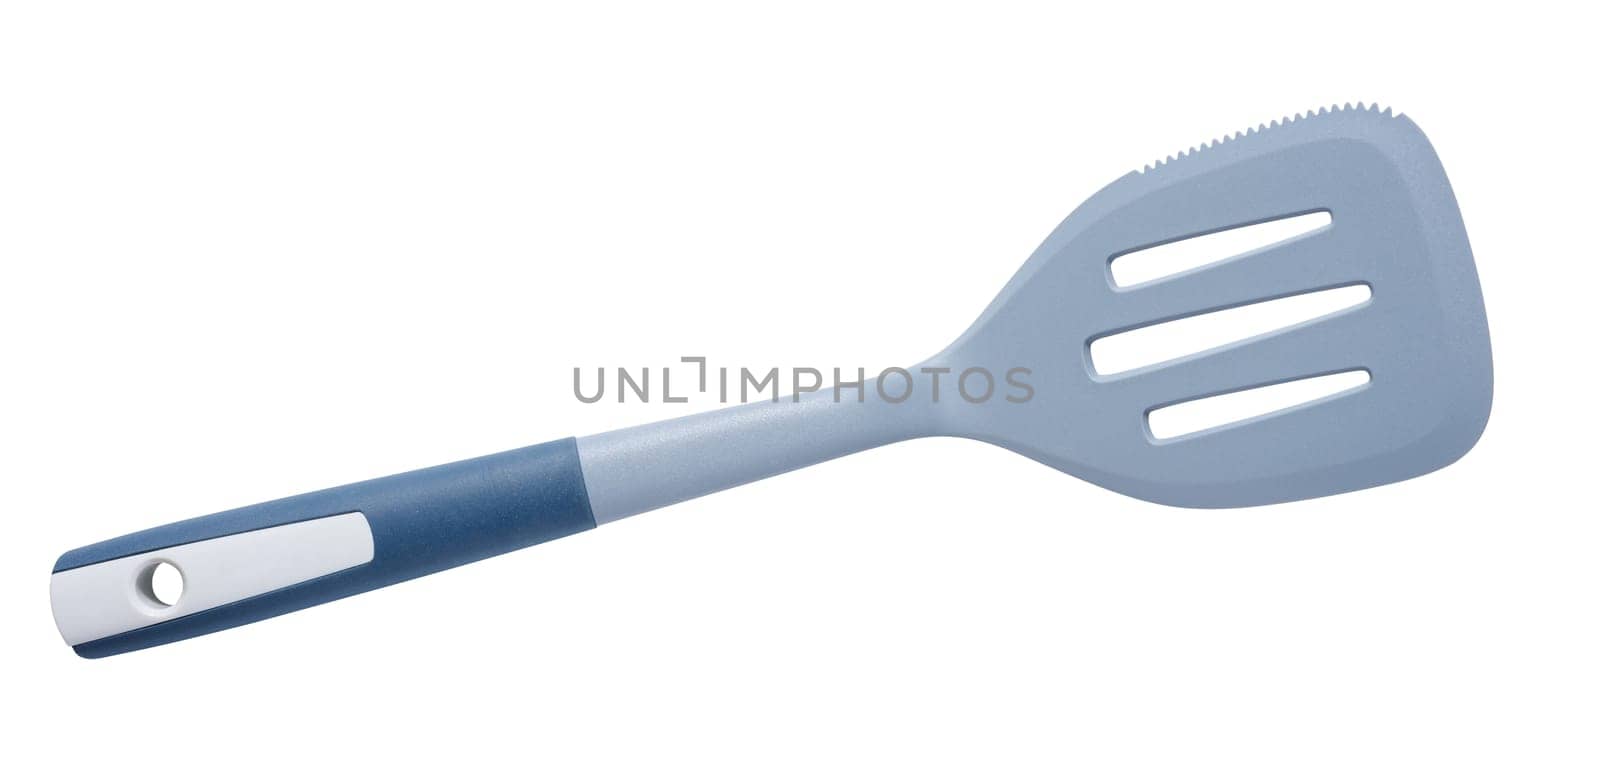 Plastic gray spatula for cooking on a white isolated background, top view